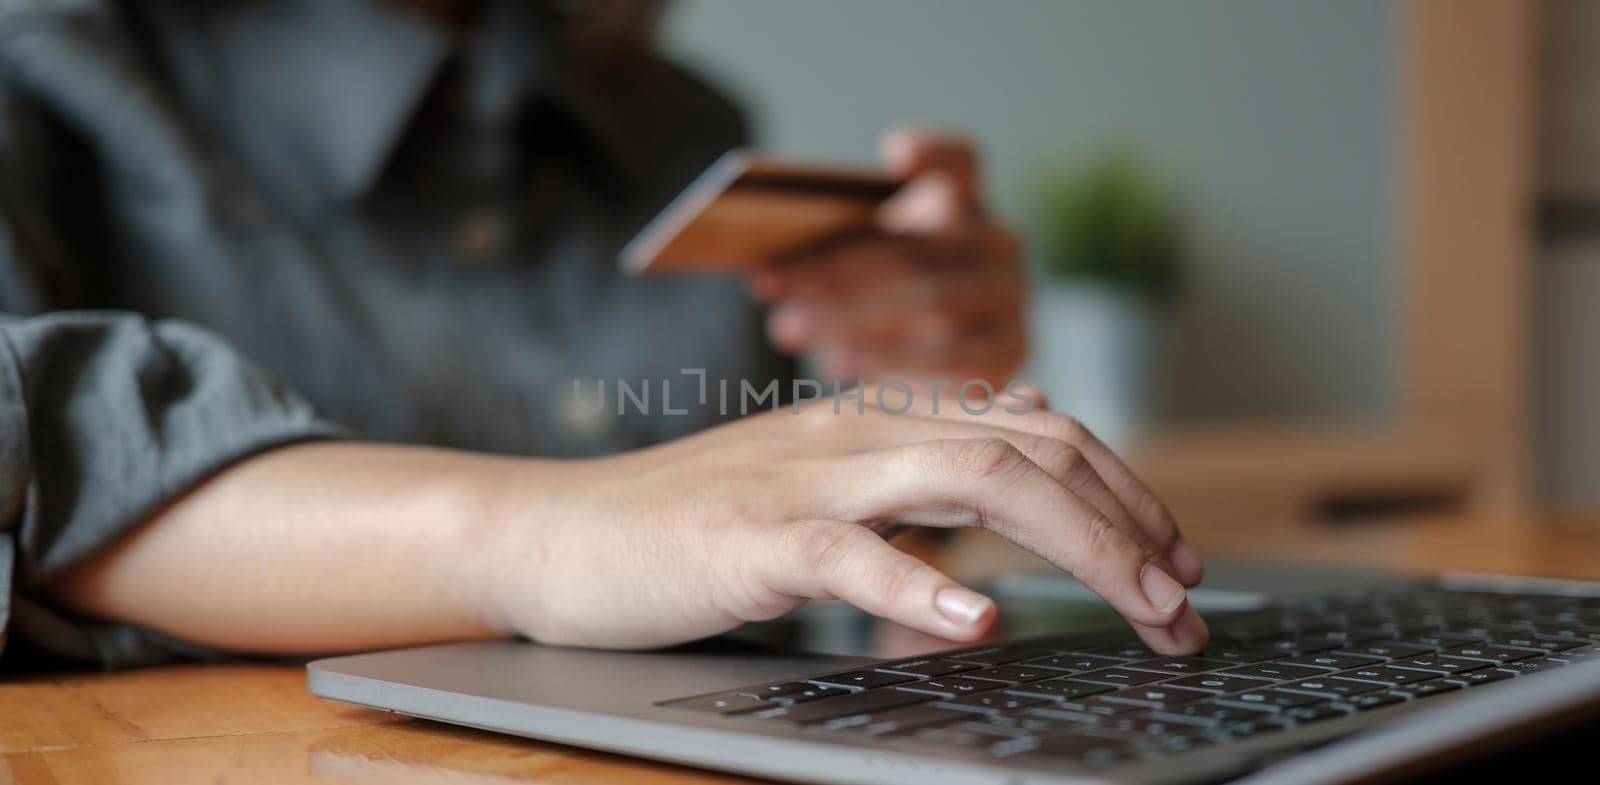 woman hand holding credit card with using laptop for online shopping while making orders at home. business, lifestyle, technology, ecommerce, digital banking and online payment concept. by wichayada